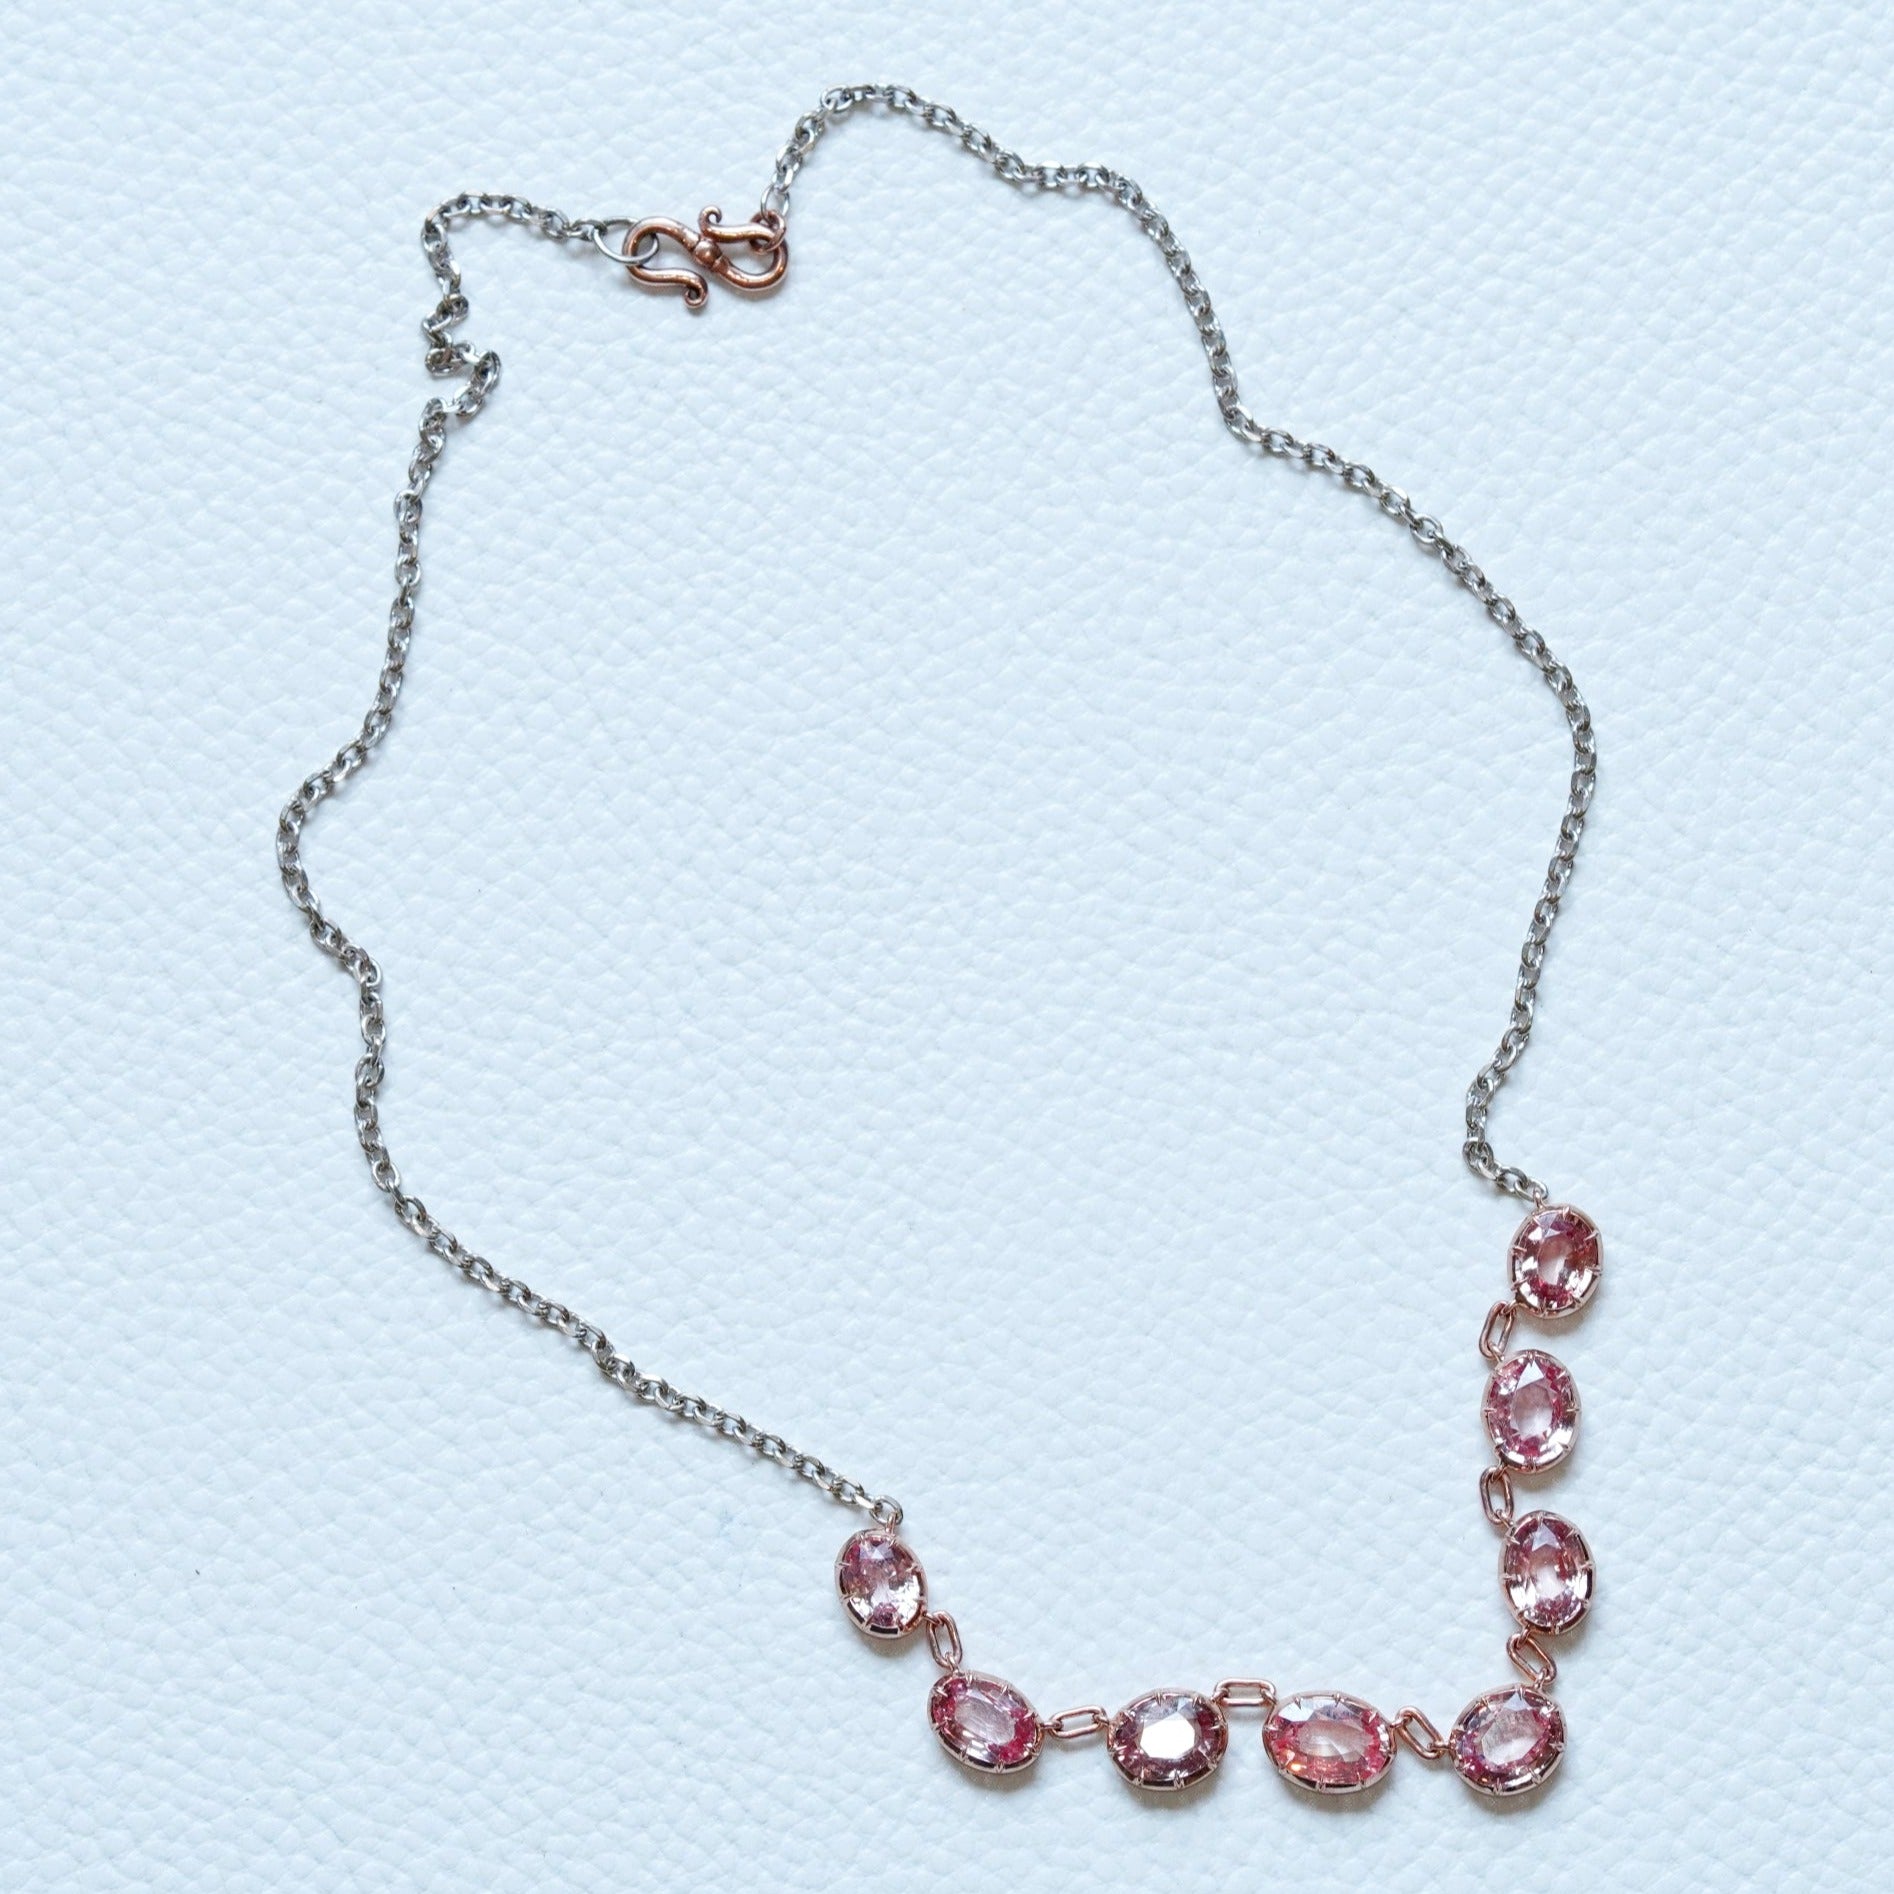 10.40-Carat Oval Padparadscha Sapphire Necklace in 18K Rose Gold and Platinum